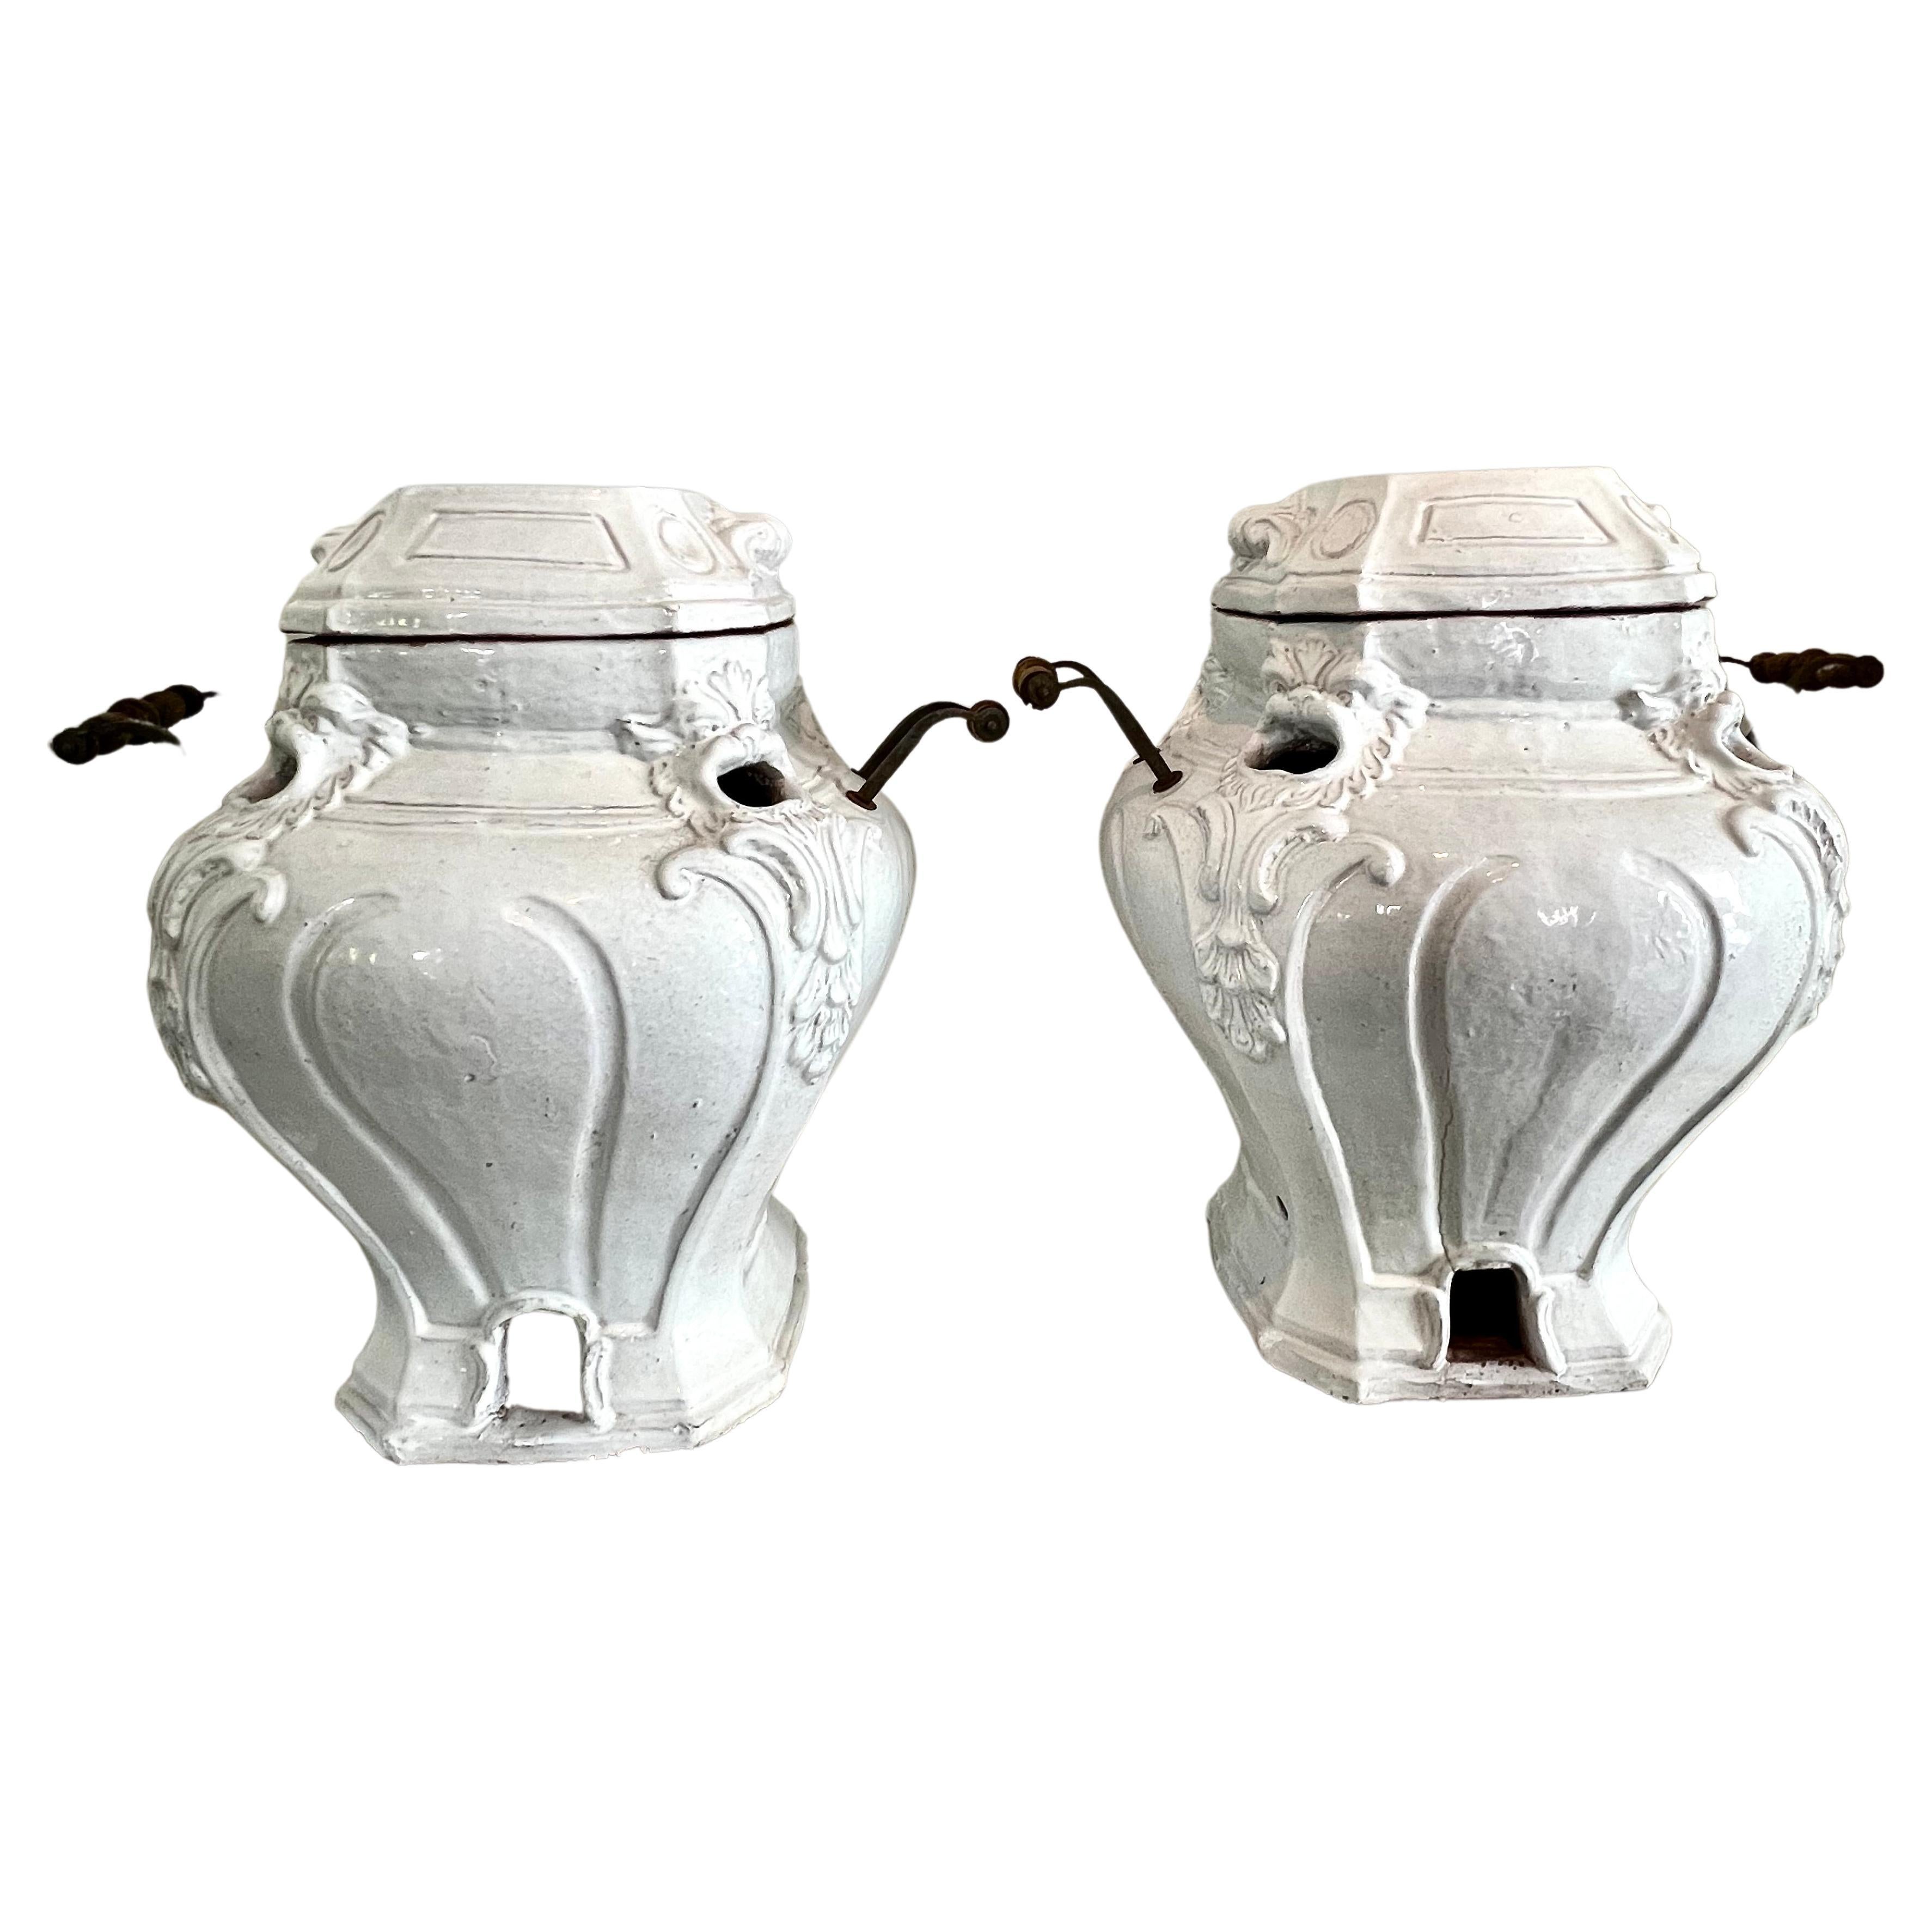 Pair of Glazed Terracotta Garden Urns or Jardinieres with Metal and Wood Handles For Sale 1